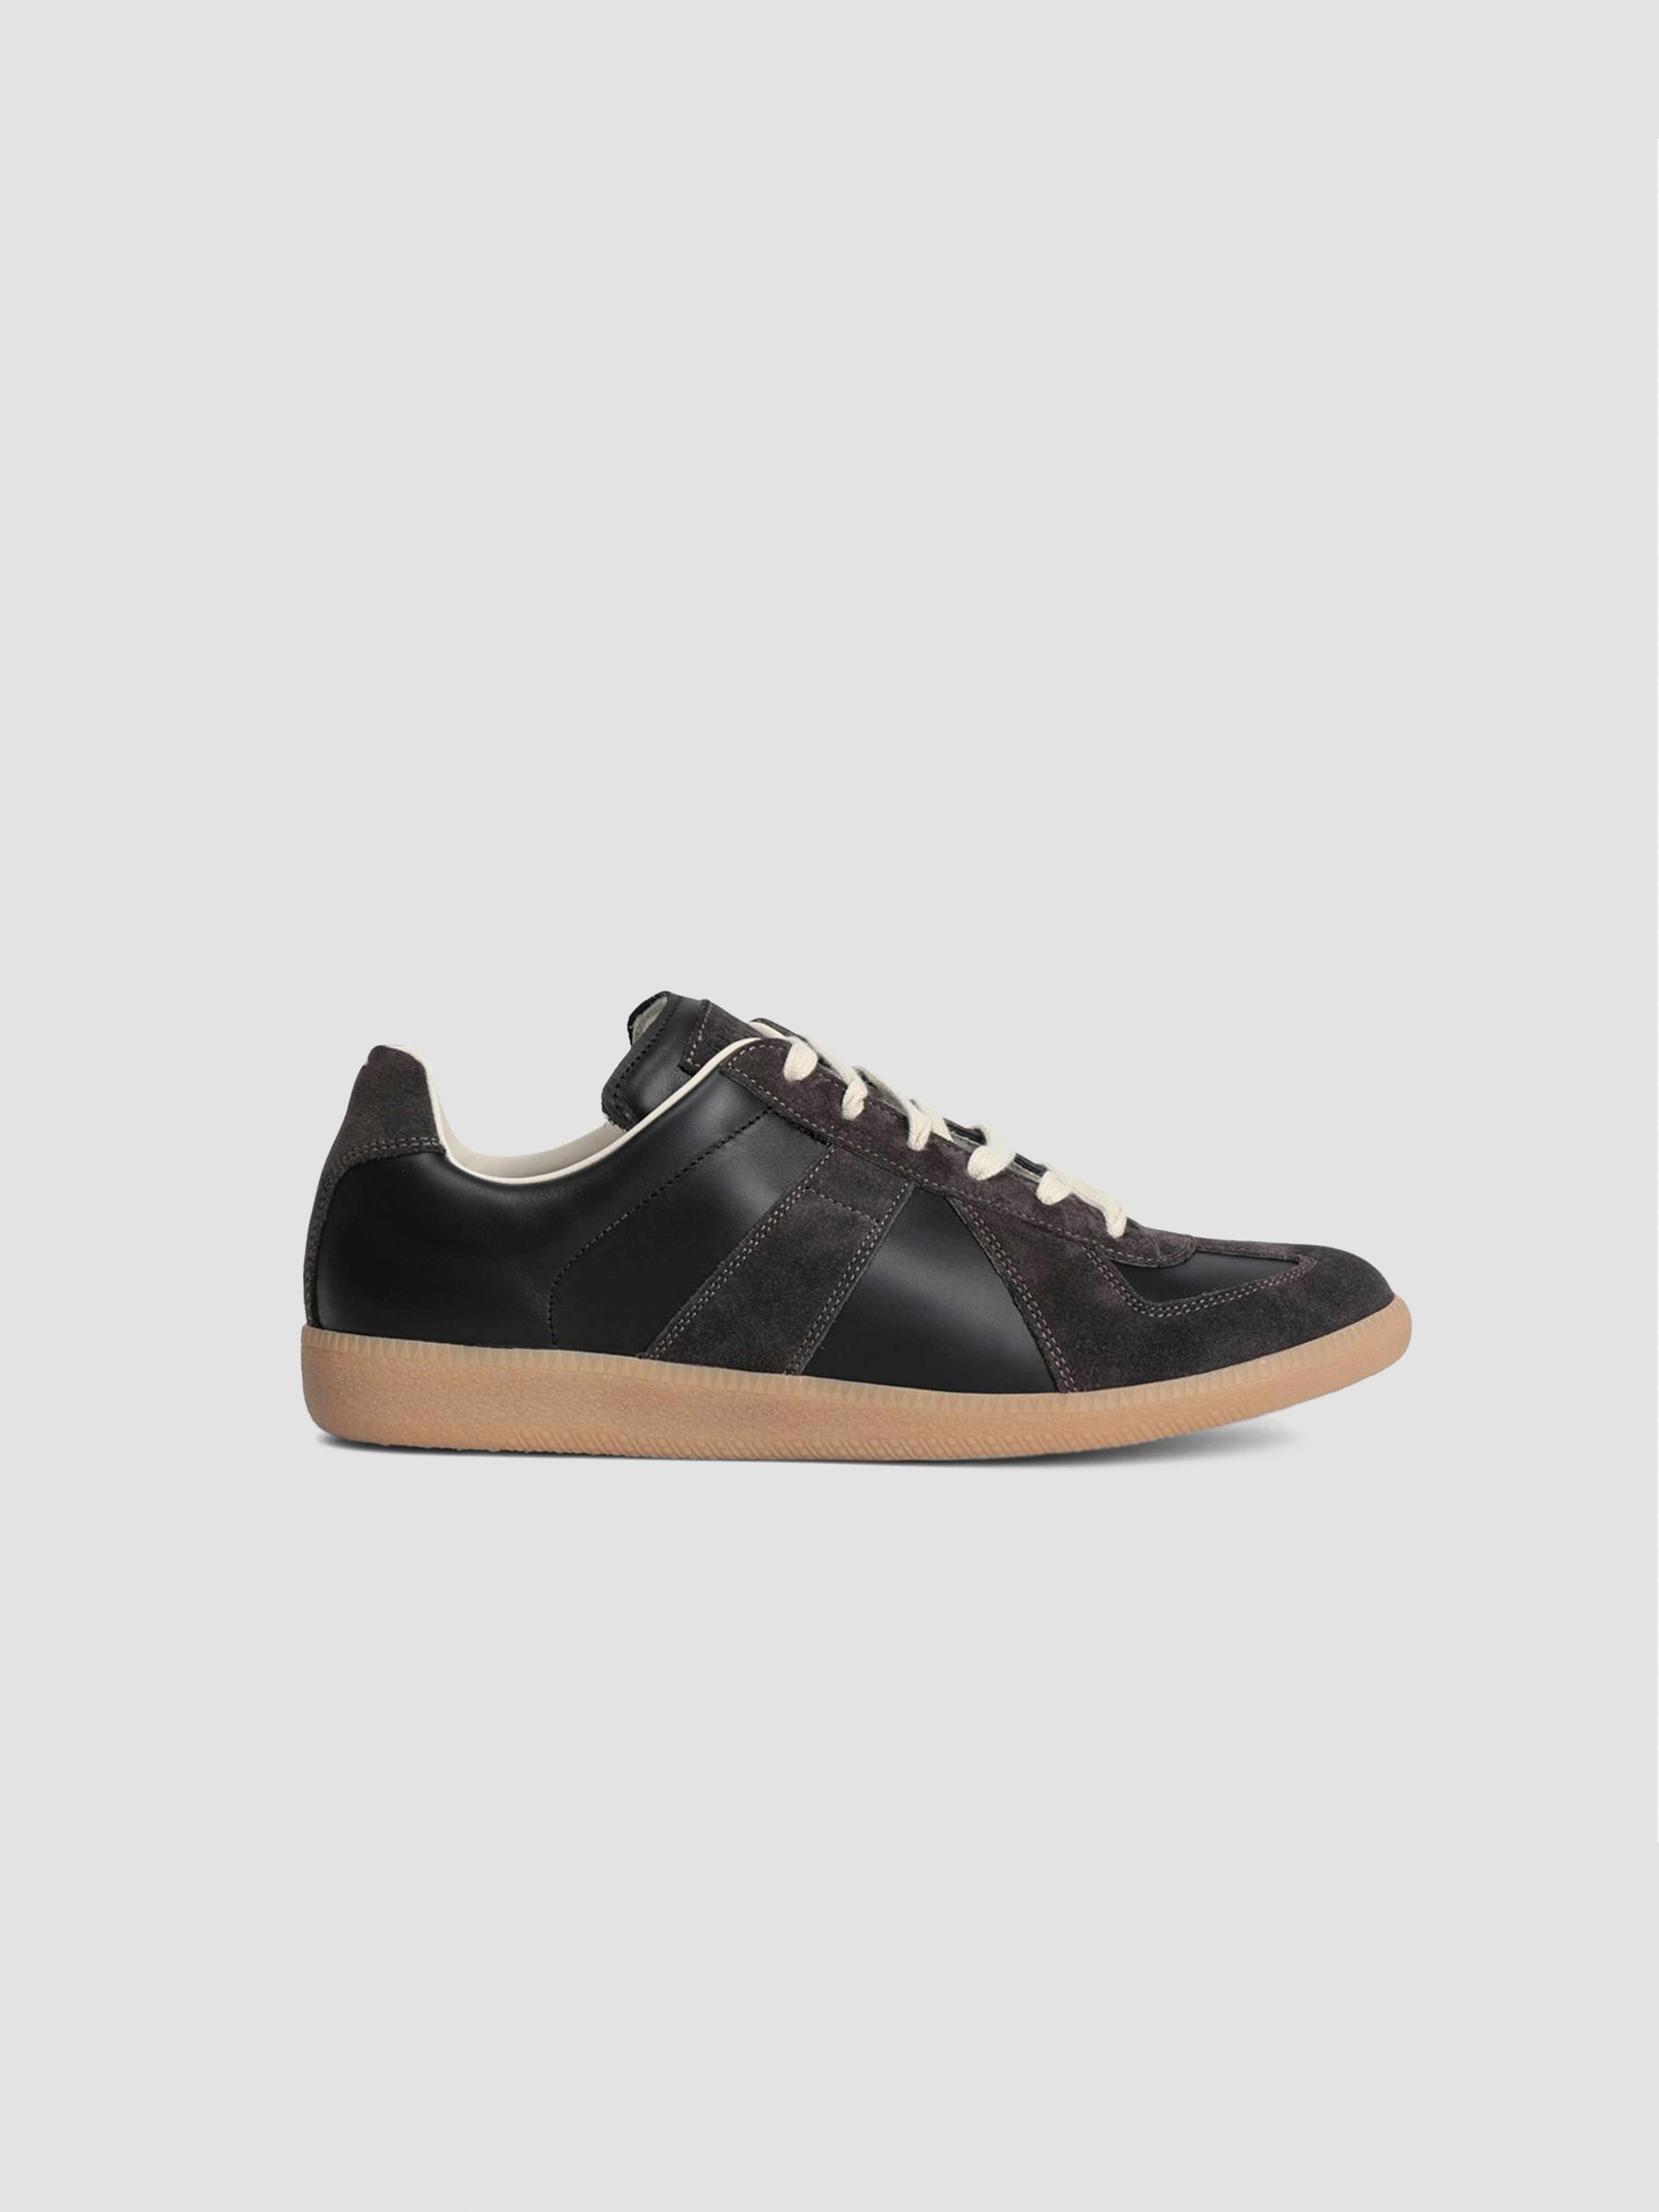 MAISON MARGIELA REPLICA LOW TOP BLACK S57WS0236 | BEST PACKING STORE